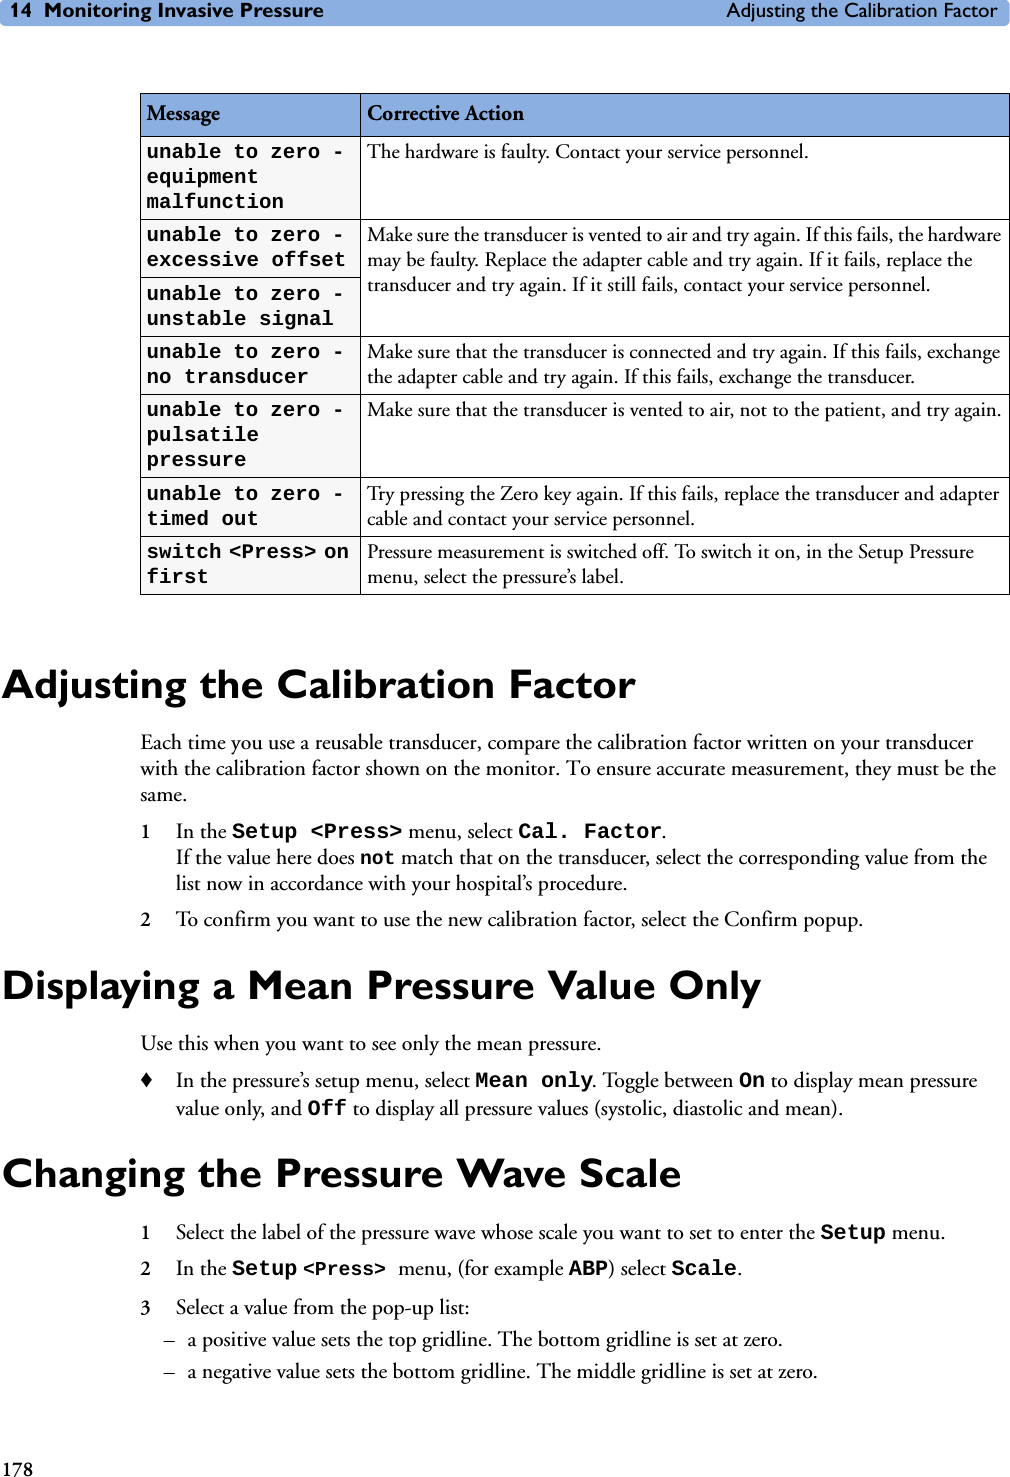 14 Monitoring Invasive Pressure Adjusting the Calibration Factor178Adjusting the Calibration FactorEach time you use a reusable transducer, compare the calibration factor written on your transducer with the calibration factor shown on the monitor. To ensure accurate measurement, they must be the same. 1In the Setup &lt;Press&gt; menu, select Cal. Factor. If the value here does not match that on the transducer, select the corresponding value from the list now in accordance with your hospital’s procedure.2To confirm you want to use the new calibration factor, select the Confirm popup.Displaying a Mean Pressure Value OnlyUse this when you want to see only the mean pressure.♦In the pressure’s setup menu, select Mean only. Toggle between On to display mean pressure value only, and Off to display all pressure values (systolic, diastolic and mean).Changing the Pressure Wave Scale 1Select the label of the pressure wave whose scale you want to set to enter the Setup menu.2In the Setup &lt;Press&gt; menu, (for example ABP) select Scale.3Select a value from the pop-up list: – a positive value sets the top gridline. The bottom gridline is set at zero.– a negative value sets the bottom gridline. The middle gridline is set at zero.Message Corrective Actionunable to zero - equipment malfunctionThe hardware is faulty. Contact your service personnel. unable to zero - excessive offsetMake sure the transducer is vented to air and try again. If this fails, the hardware may be faulty. Replace the adapter cable and try again. If it fails, replace the transducer and try again. If it still fails, contact your service personnel.unable to zero - unstable signalunable to zero - no transducerMake sure that the transducer is connected and try again. If this fails, exchange the adapter cable and try again. If this fails, exchange the transducer.unable to zero - pulsatile pressureMake sure that the transducer is vented to air, not to the patient, and try again.unable to zero - timed outTry pressing the Zero key again. If this fails, replace the transducer and adapter cable and contact your service personnel.switch &lt;Press&gt; on firstPressure measurement is switched off. To switch it on, in the Setup Pressure menu, select the pressure’s label.